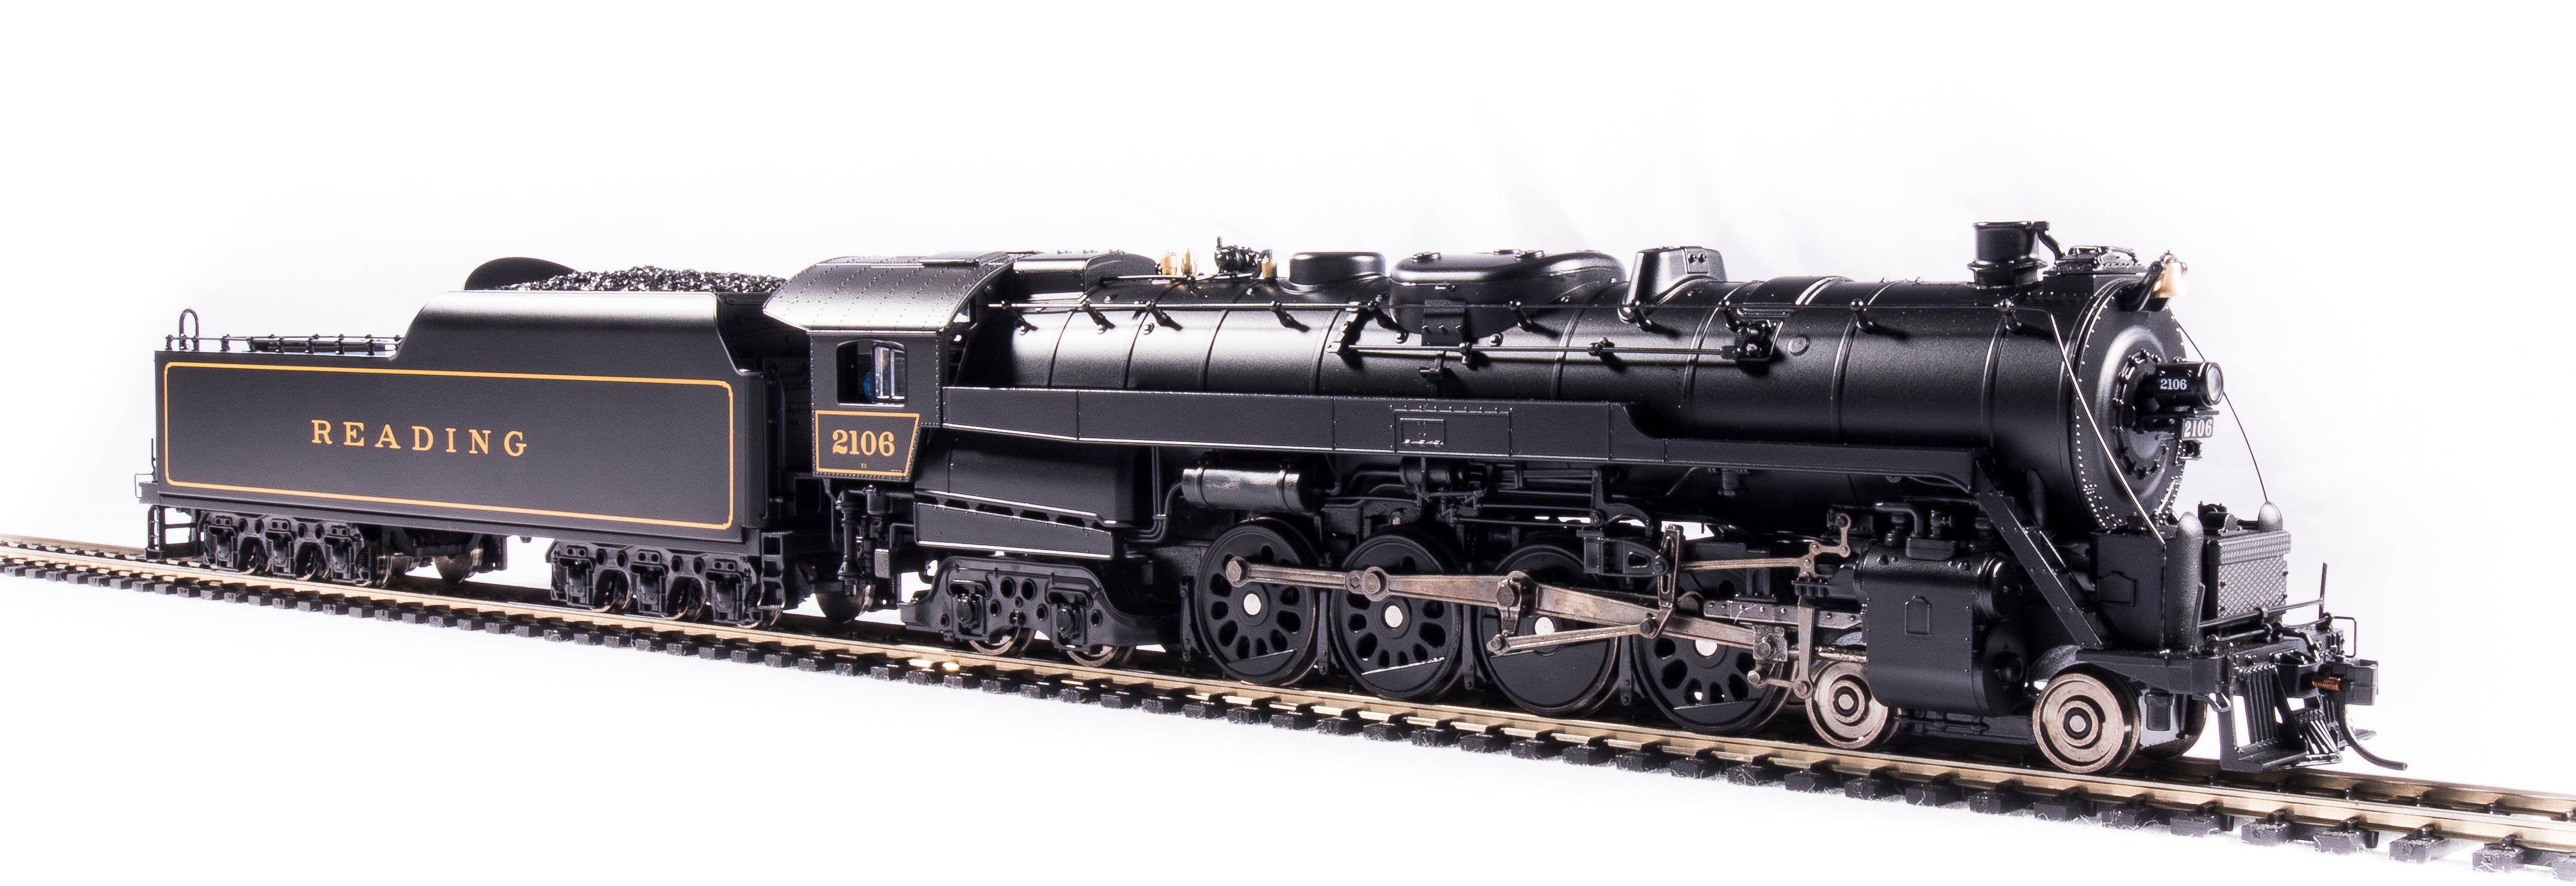 6800 Reading T1 4-8-4, In Service Version #2105, Paragon4 Sound/DC/DCC, Smoke, HO